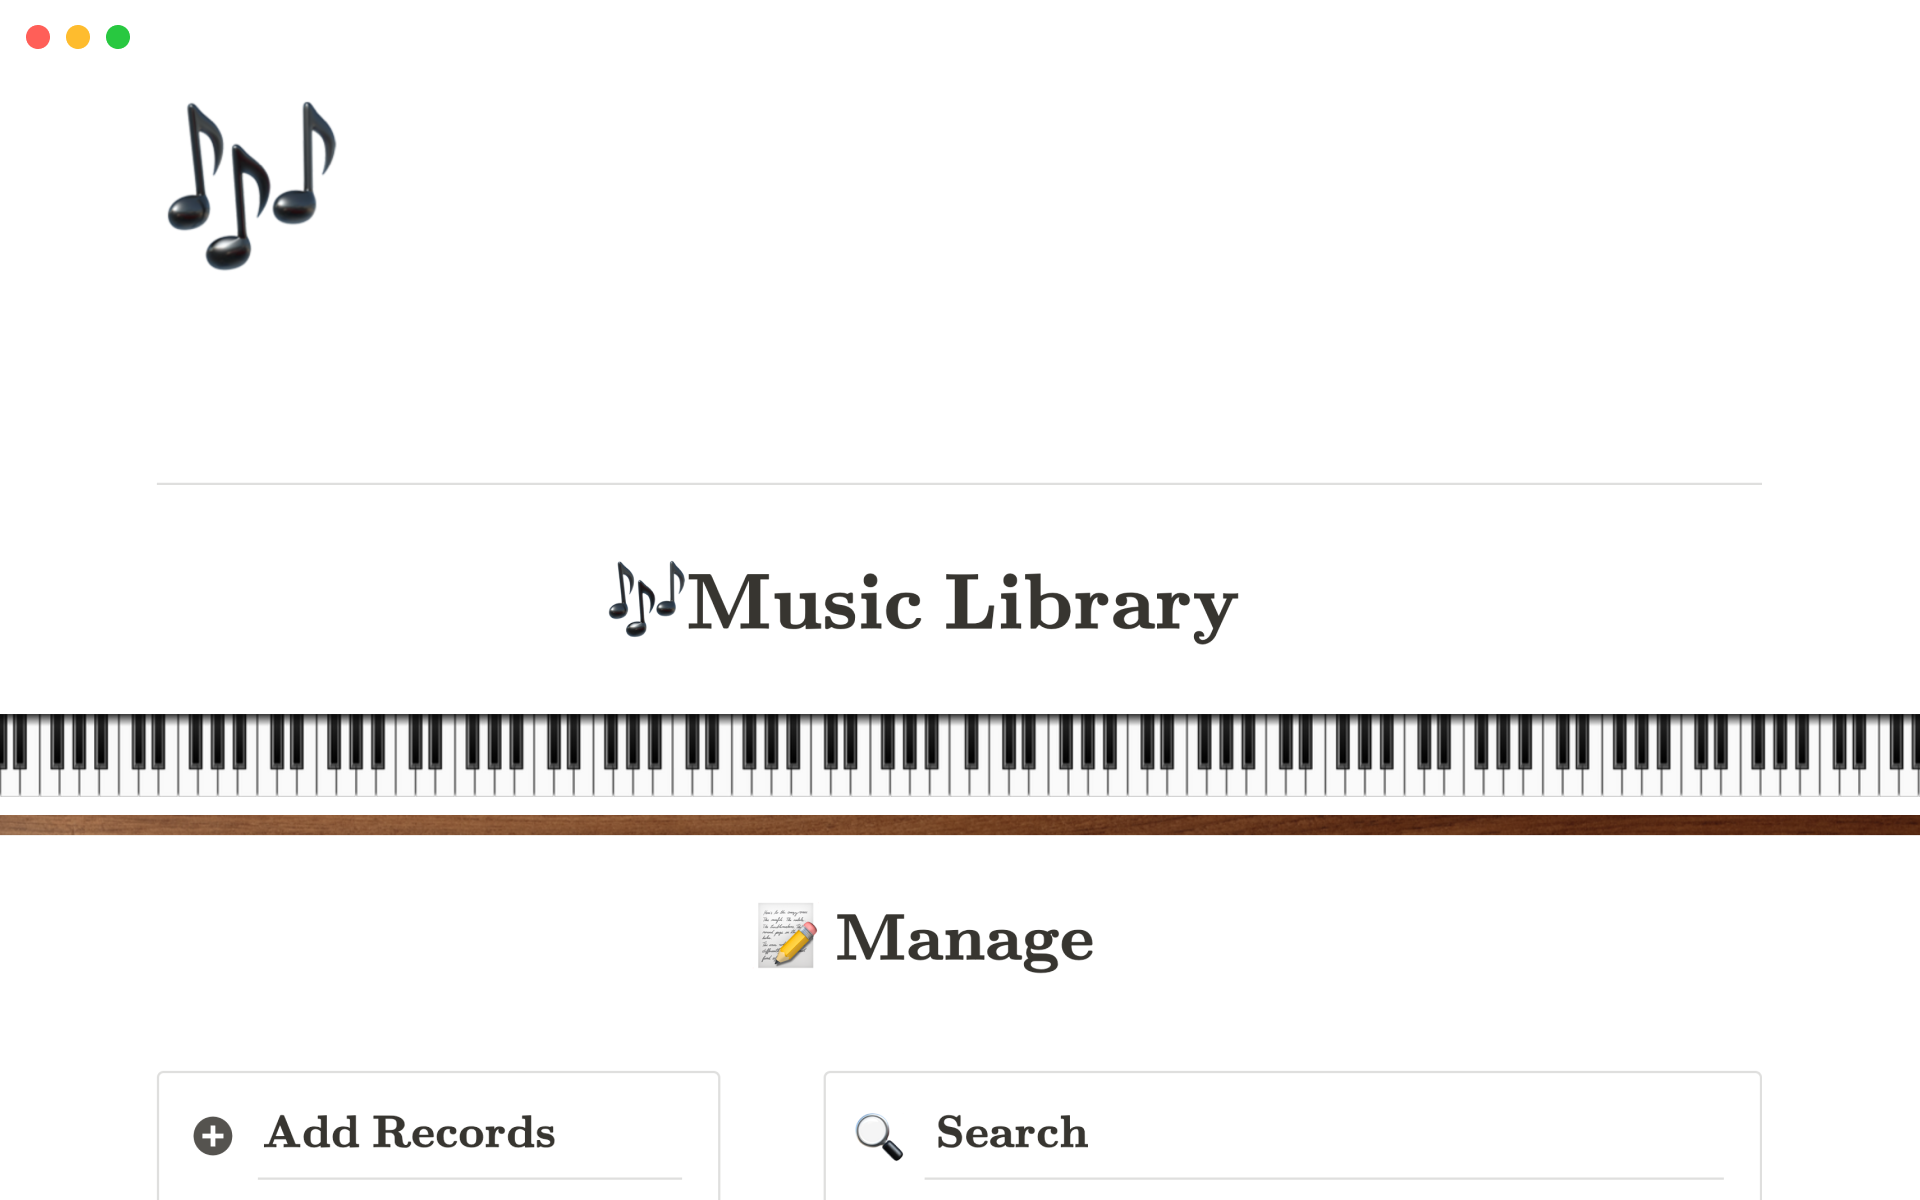 This system helps you save time by organizing your entire music library in one spot.